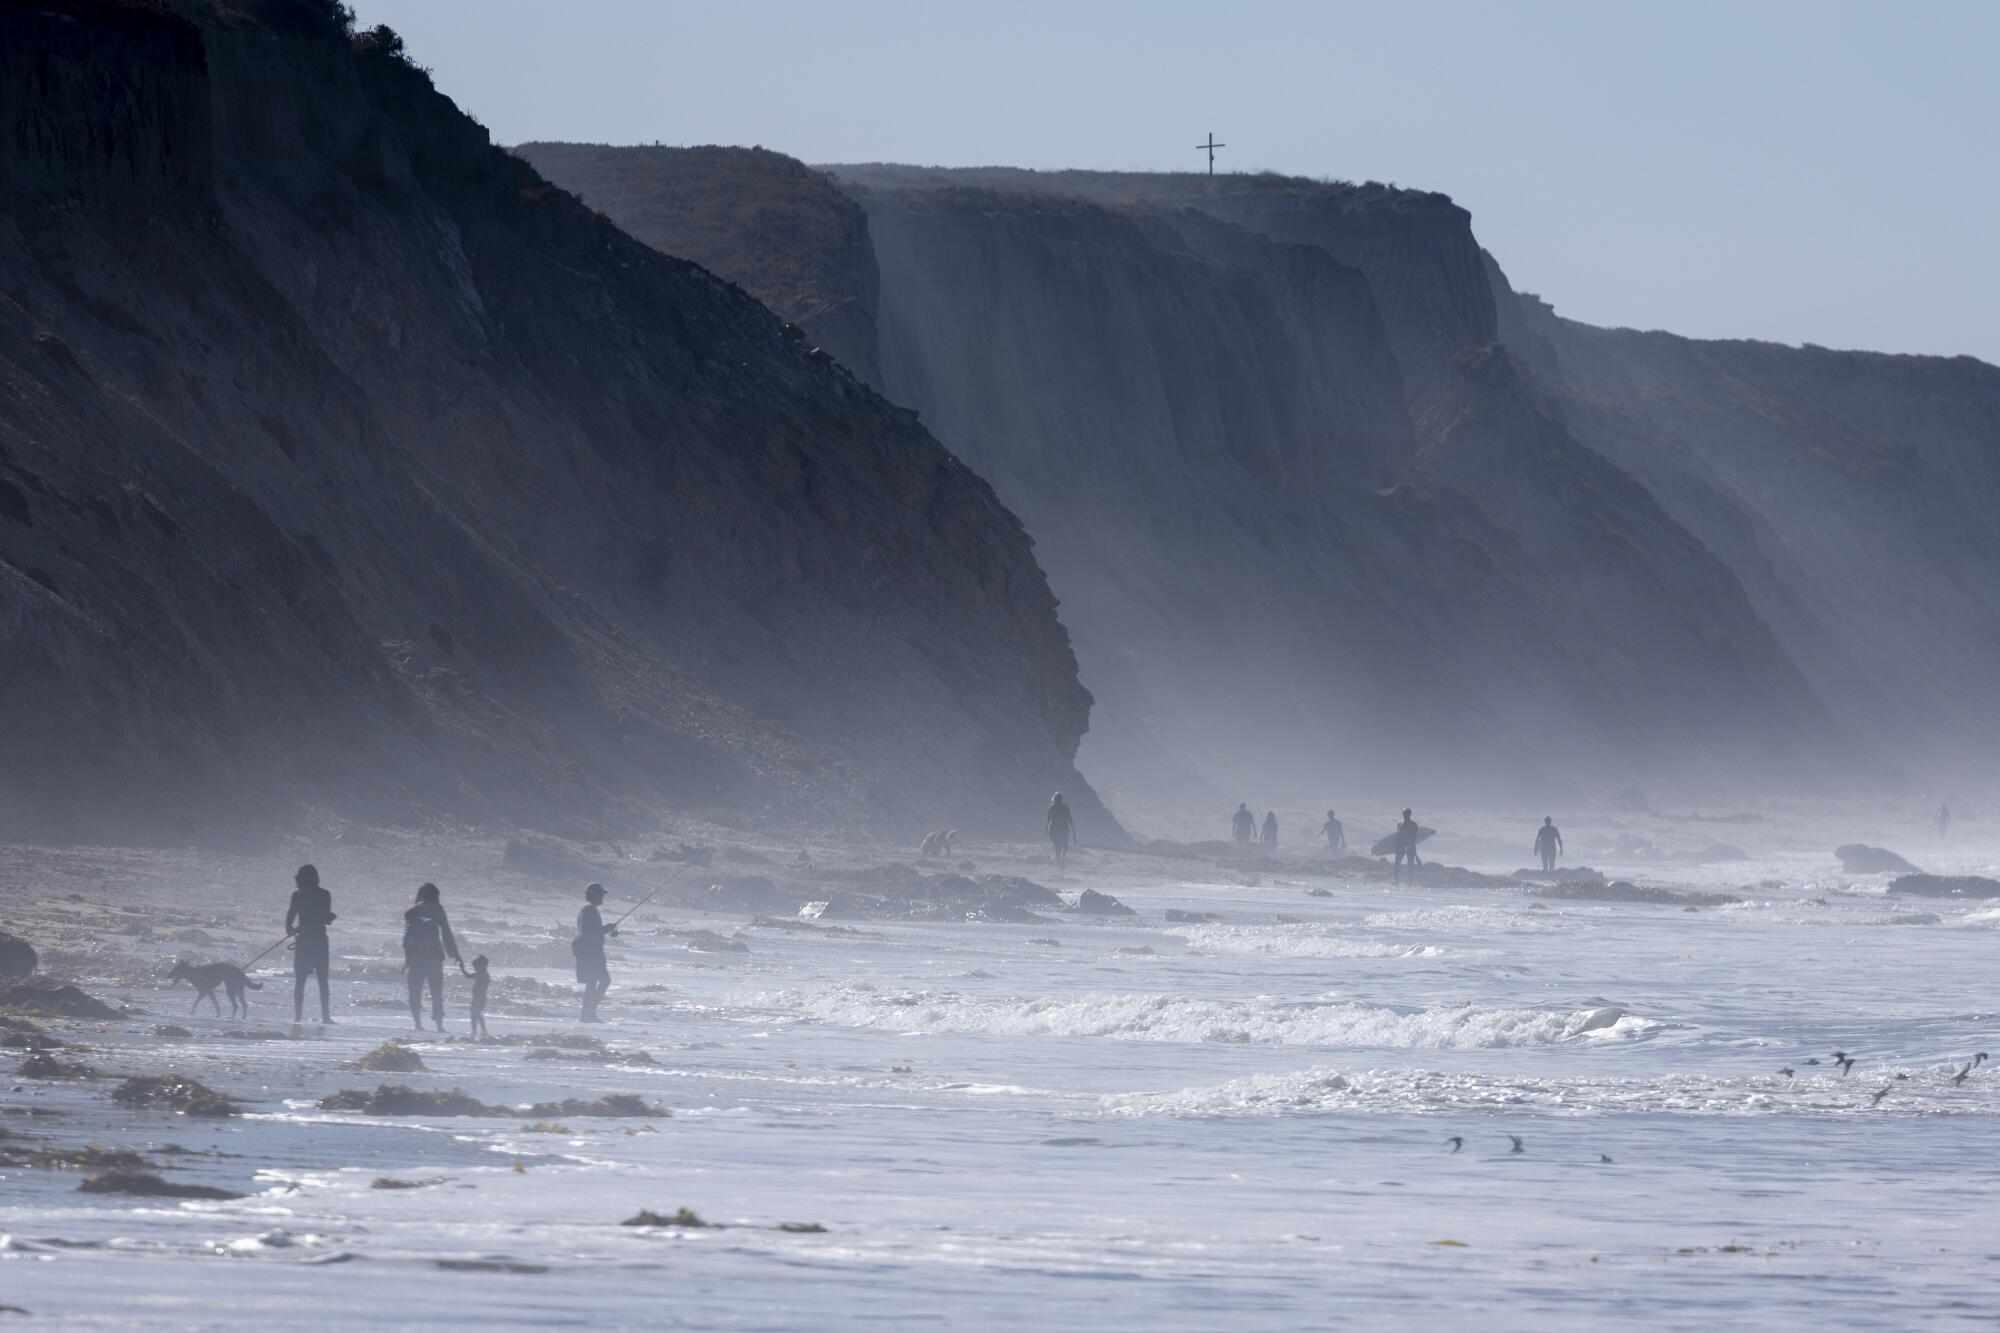 Beachgoers walk along the surf at the base of tall bluffs.